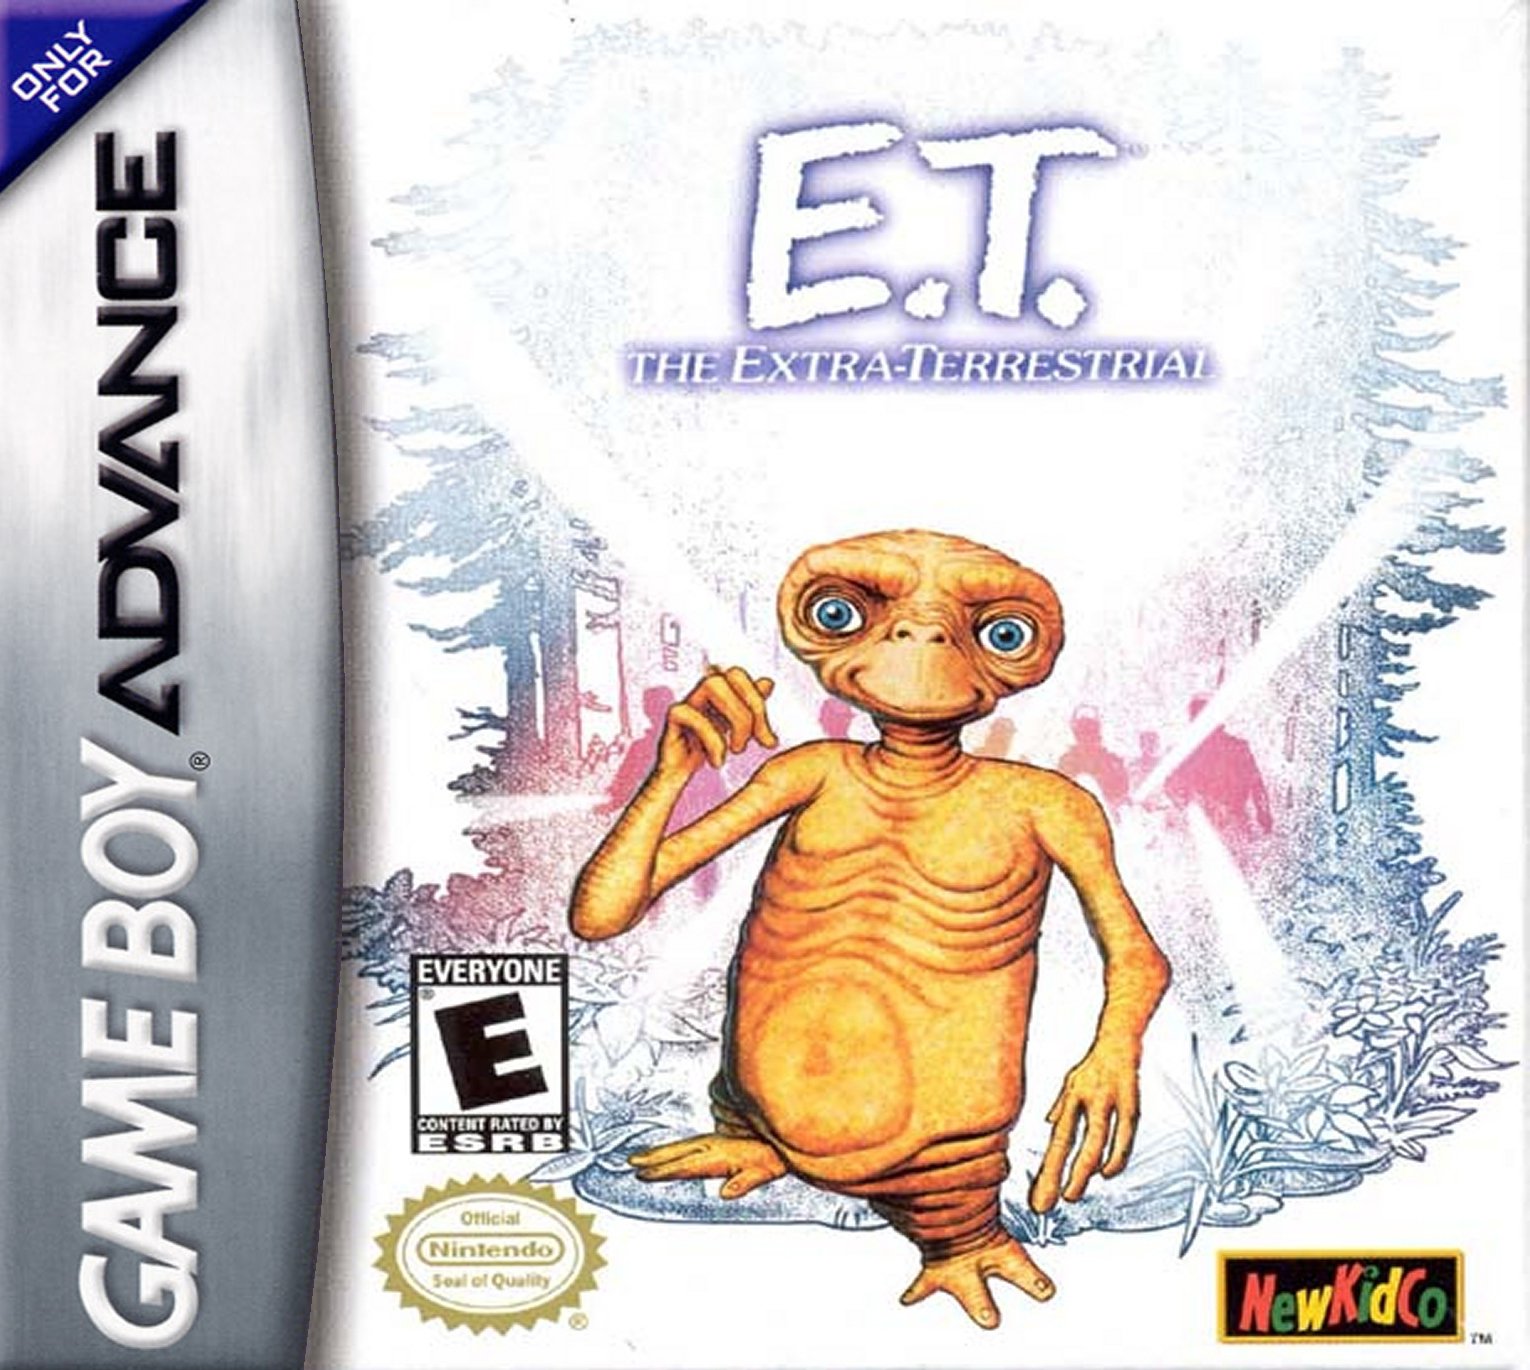 The extra world is. Extra Terrestrial игра. E.T. the Extra-Terrestrial от Atari. E.T. game. E.T. the Extra-Terrestrial отзывы.